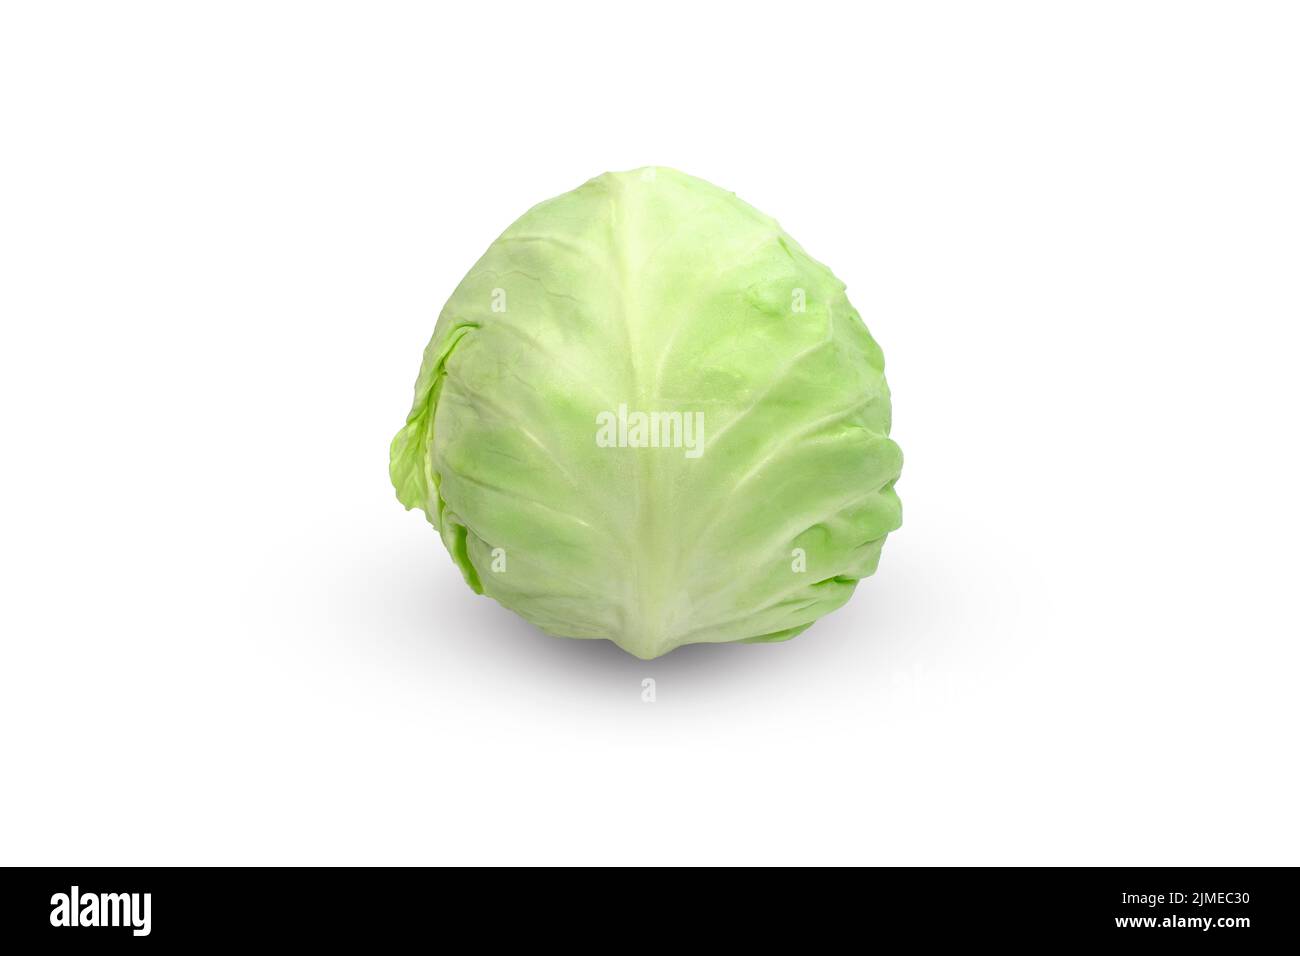 Dieting cabbage salad, photo isolated on white background, Low-calorie foods. Healthy food. Stock Photo